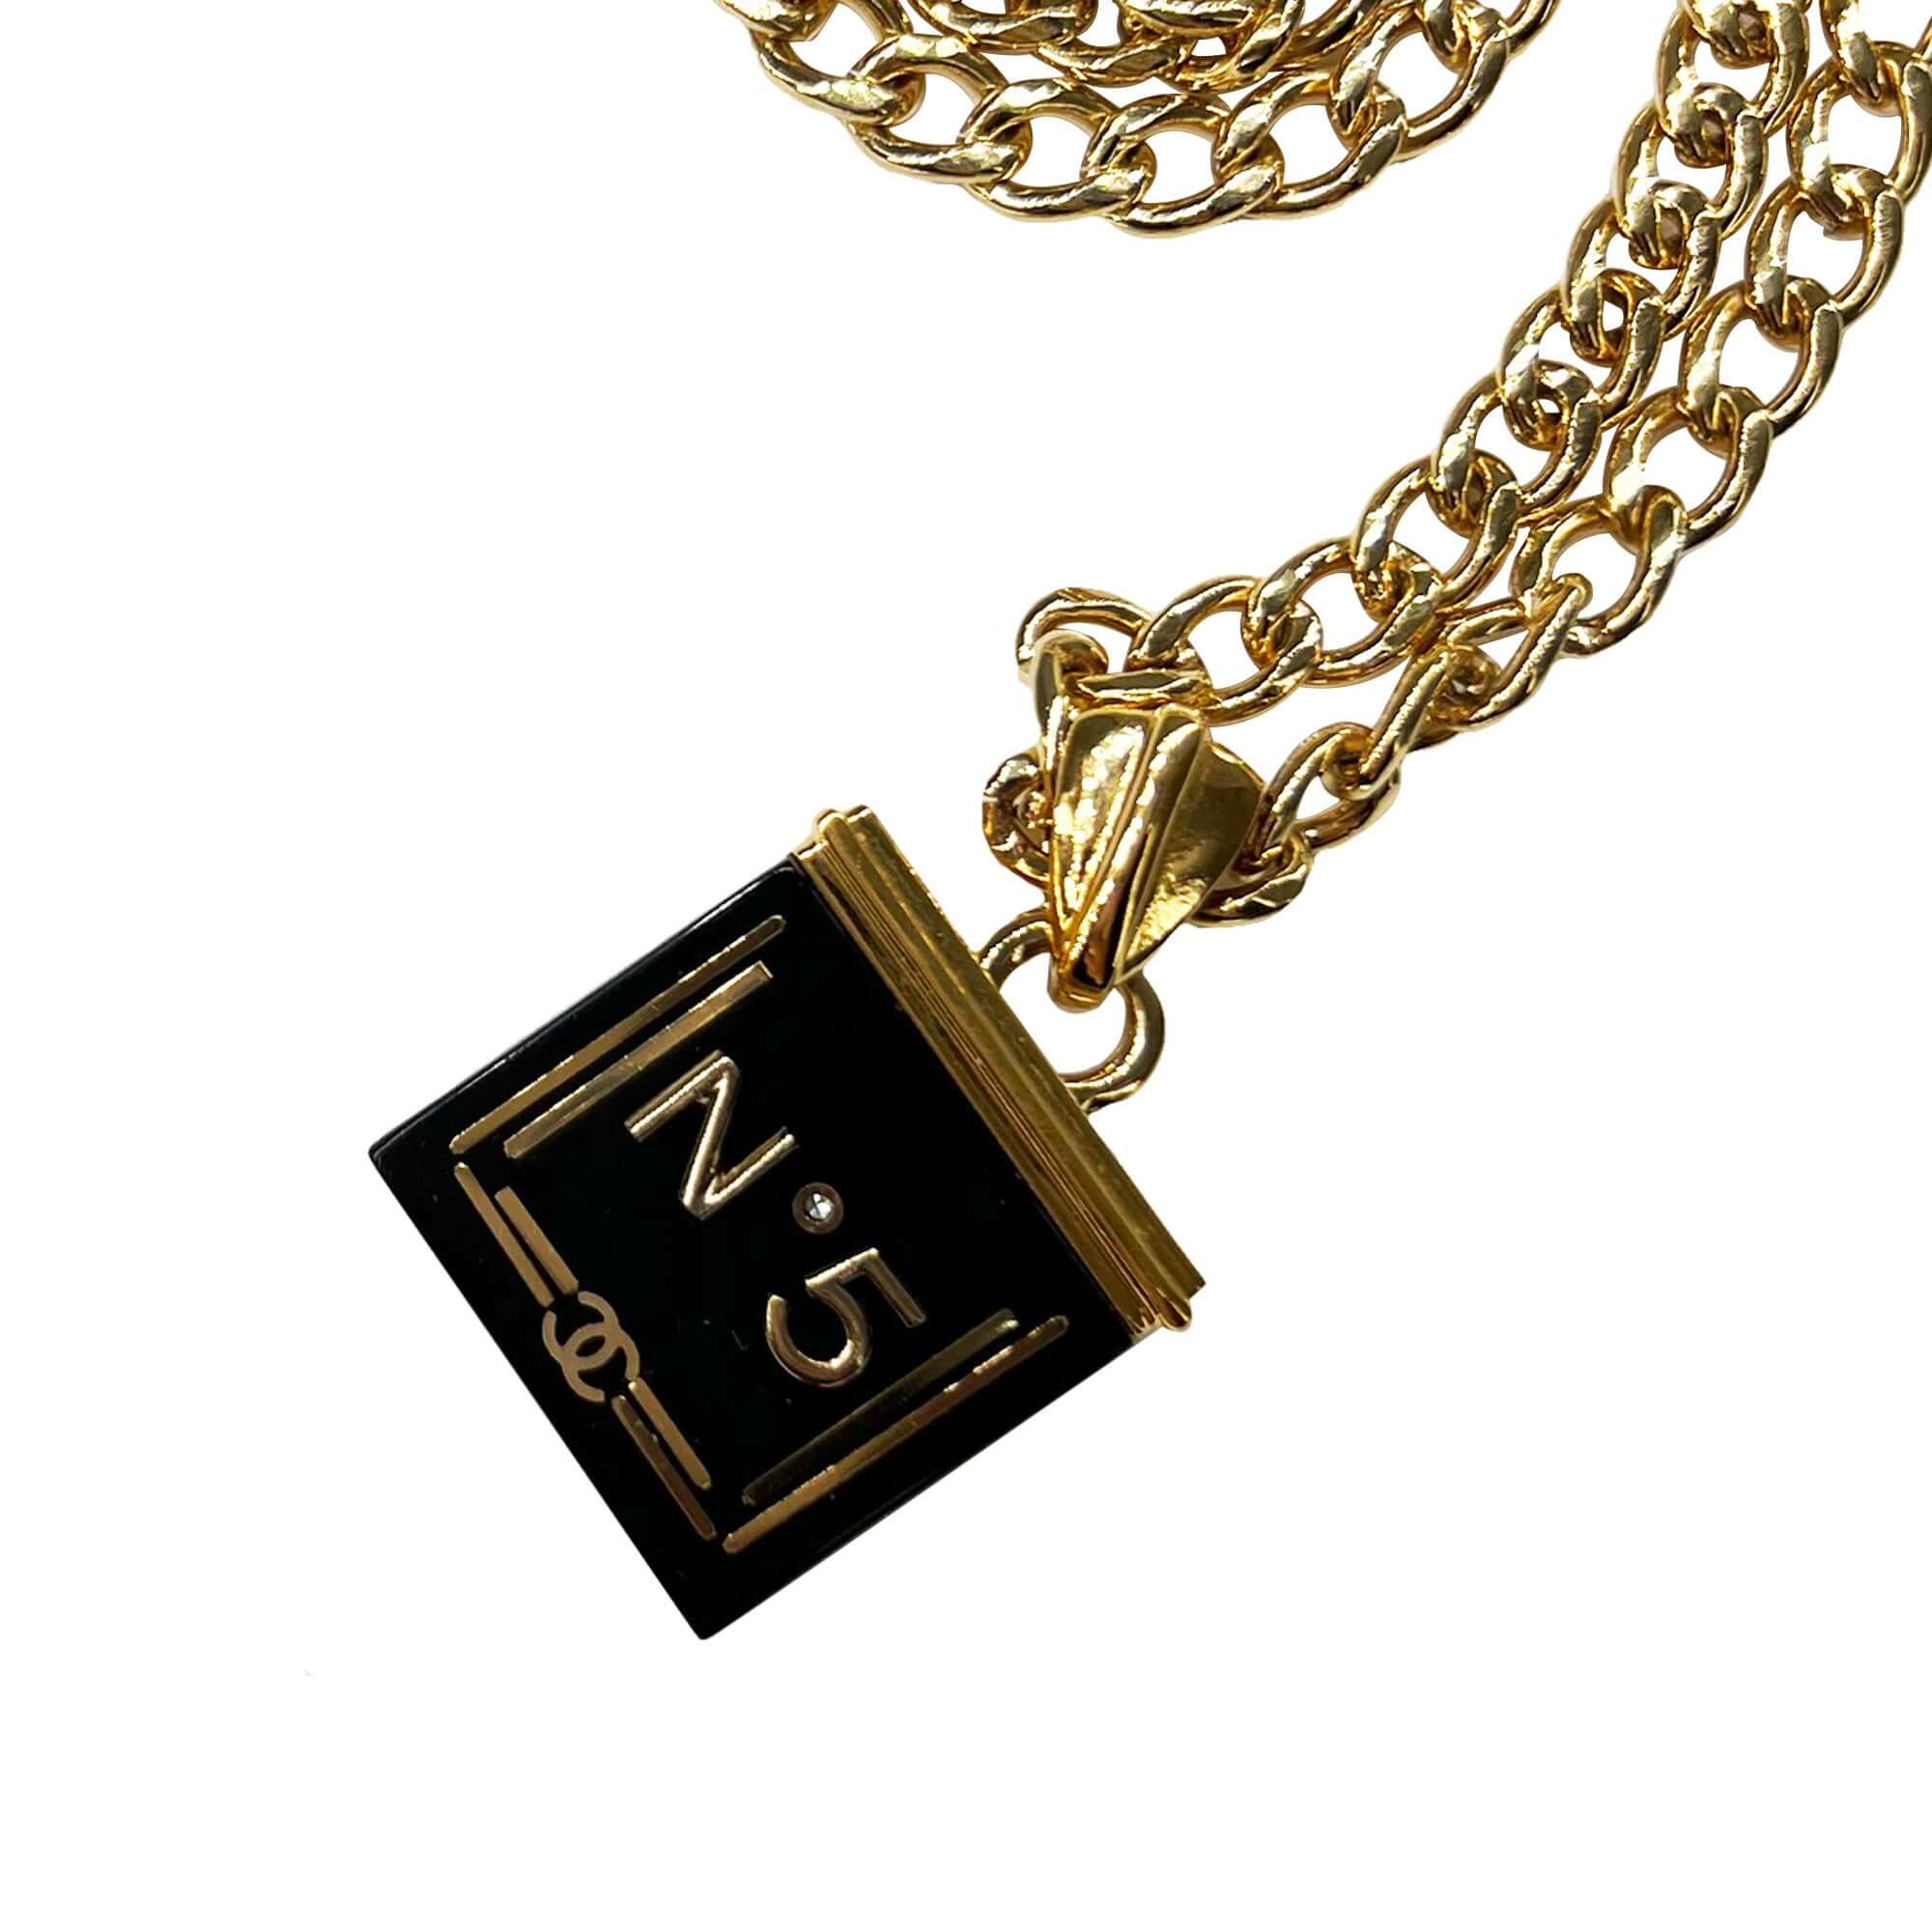 Chanel gold tone black and white necklace